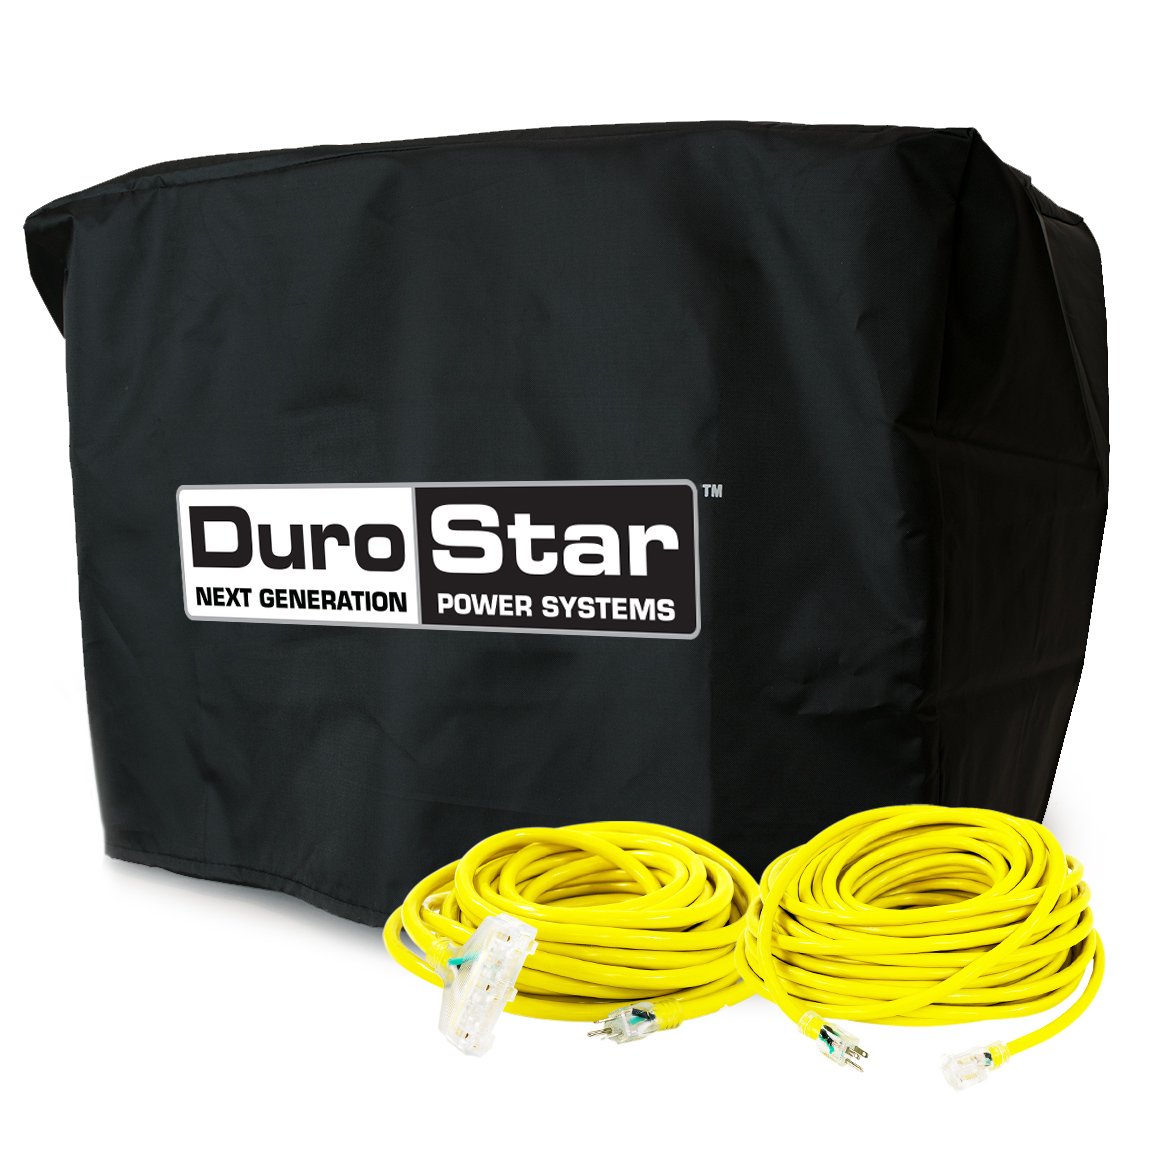 DuroStar DS10000-DXKIT 100-Foot Extension Power Cord Kit w/ Generator Cover.